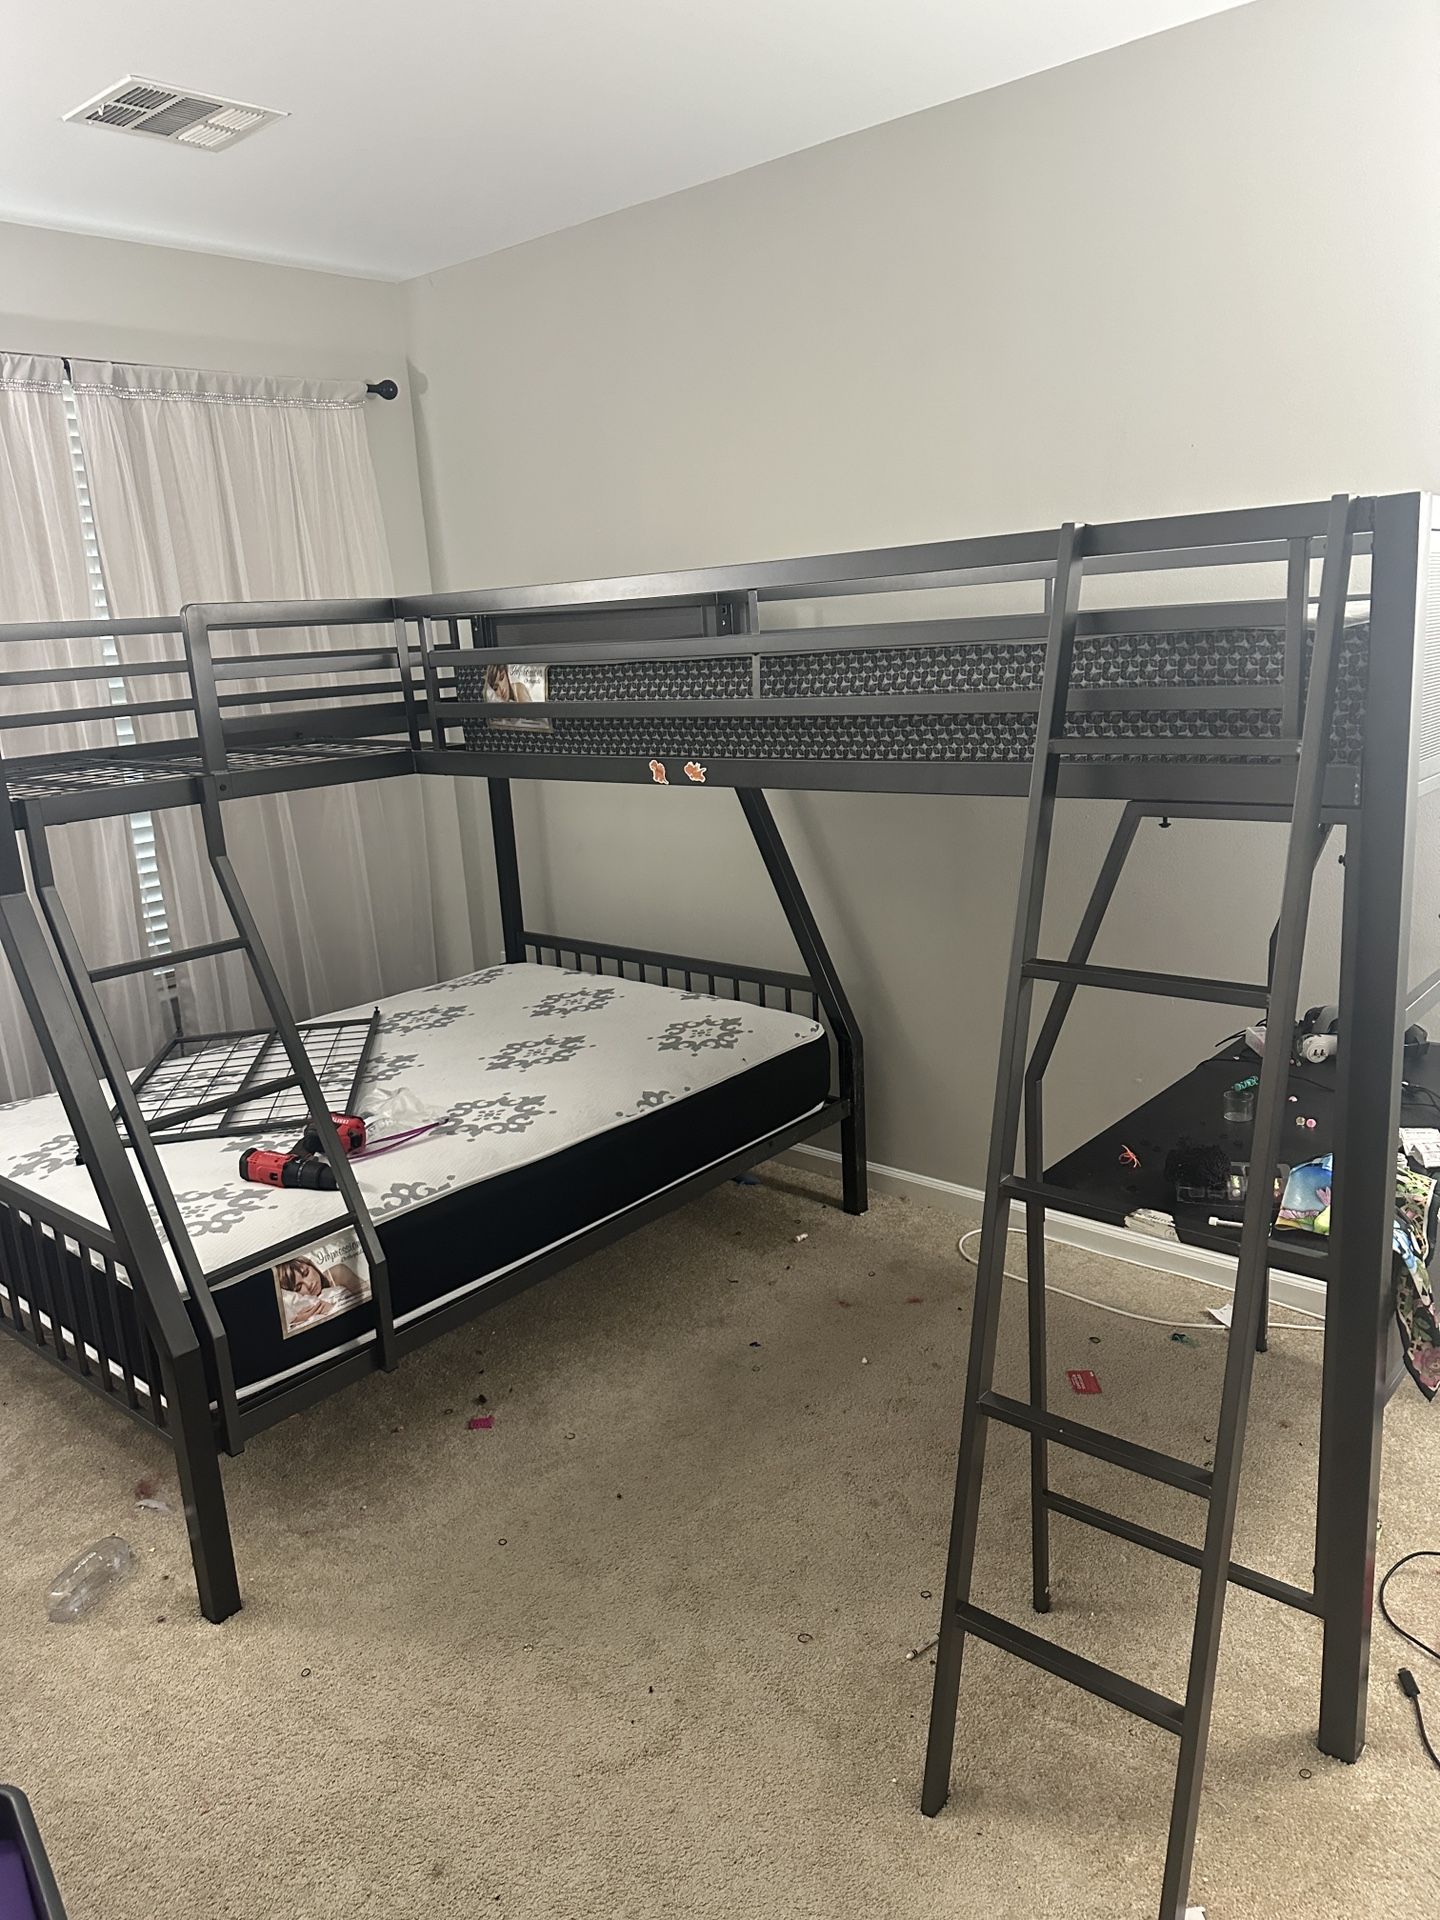 3 Bed Bunk For The Kids 